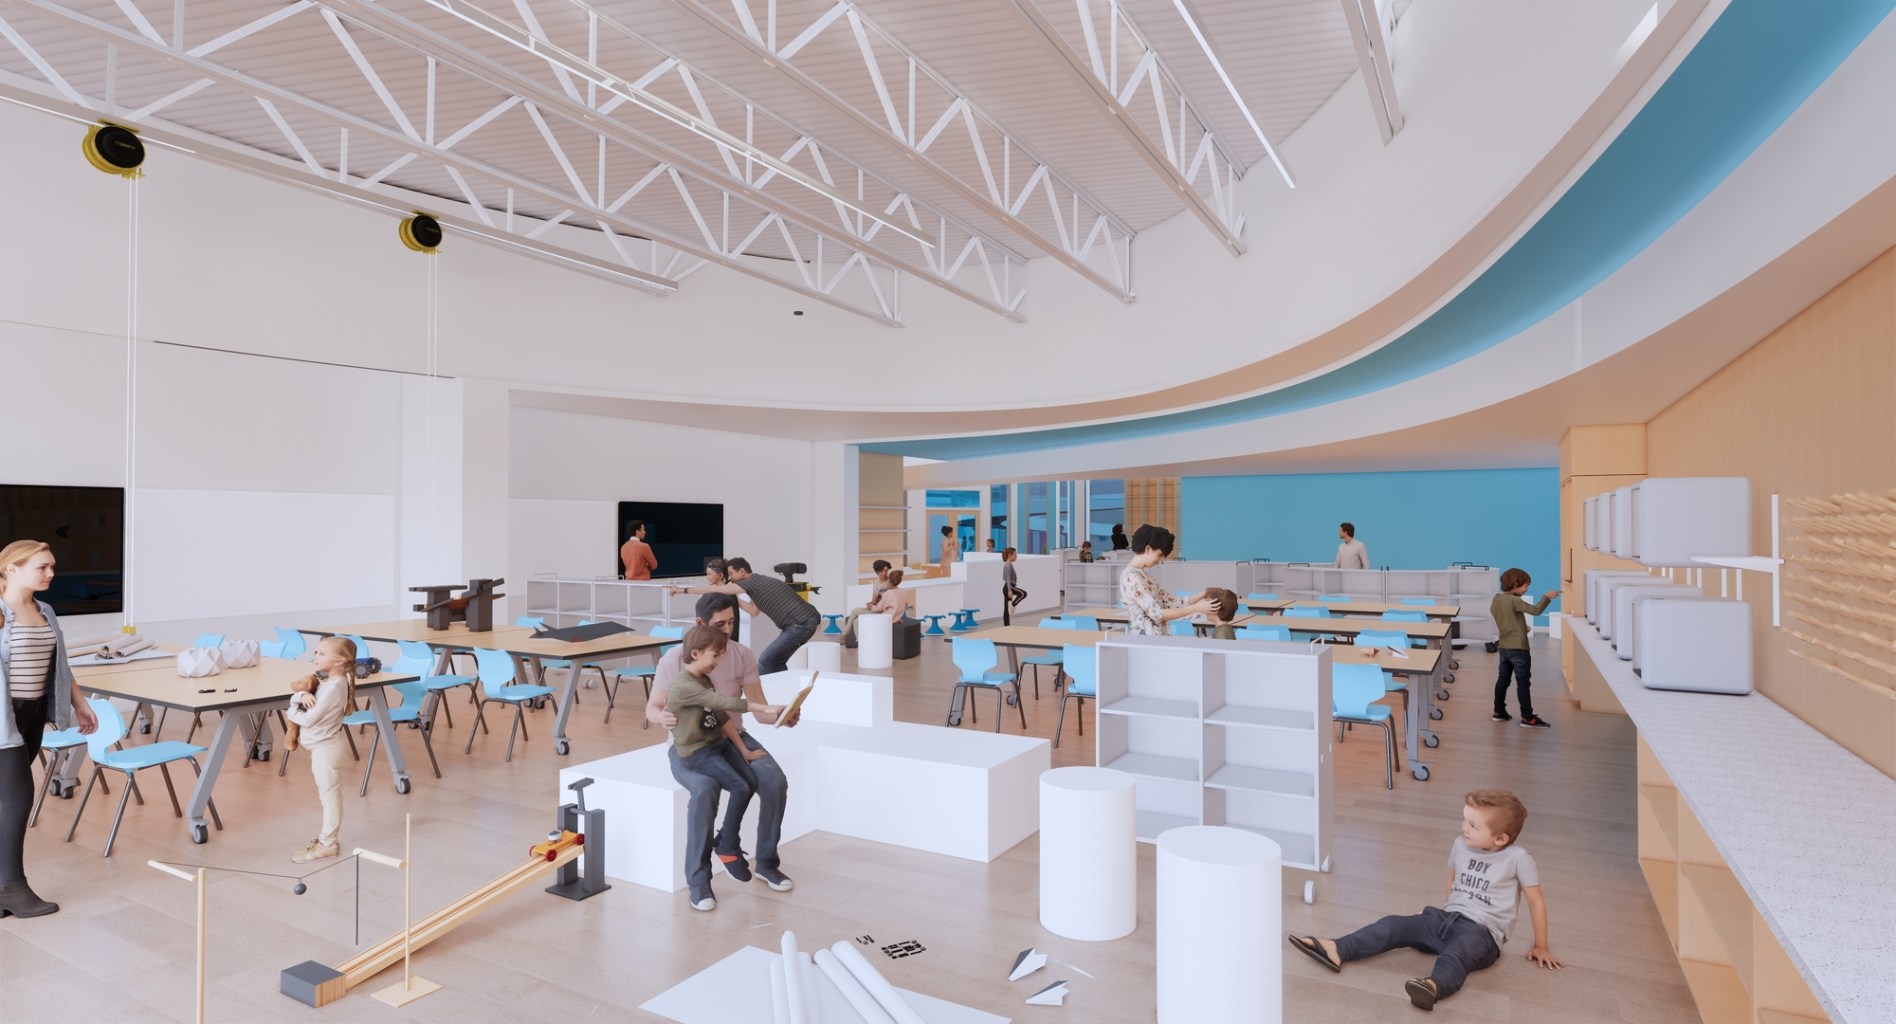 Rendering of a large, dynamic classroom setting